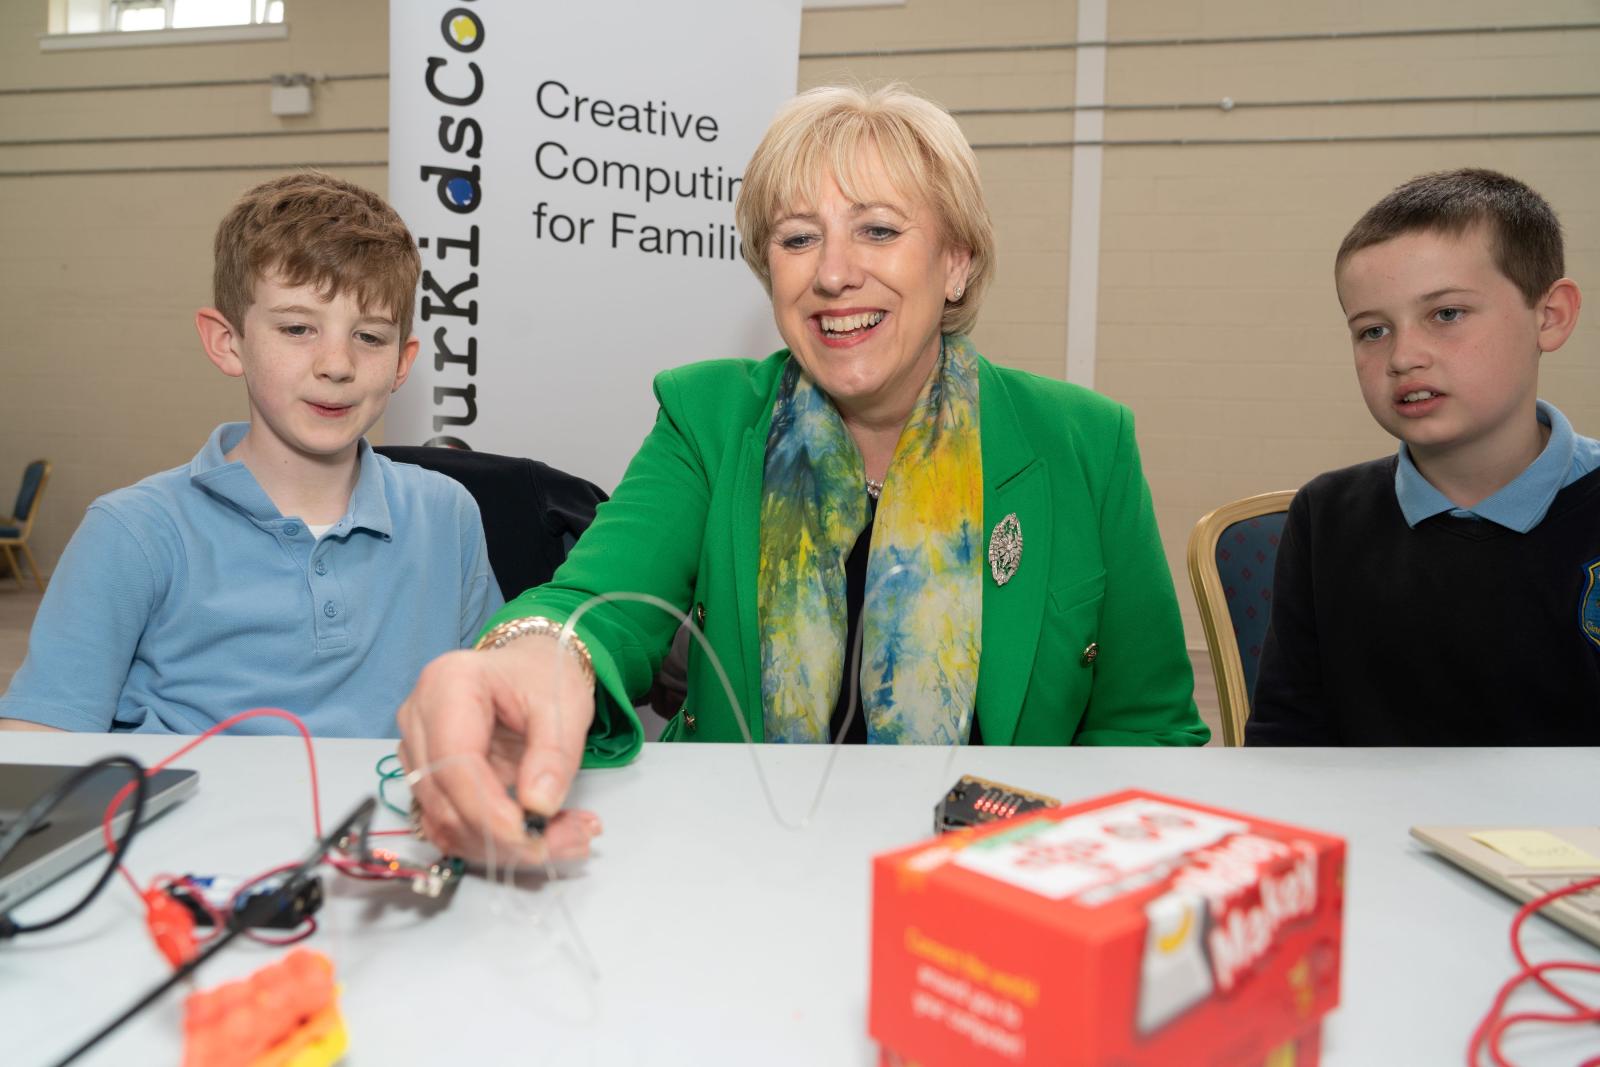 Minister for Rural and Community Development, Heather Humphreys TD visits Bective GFC